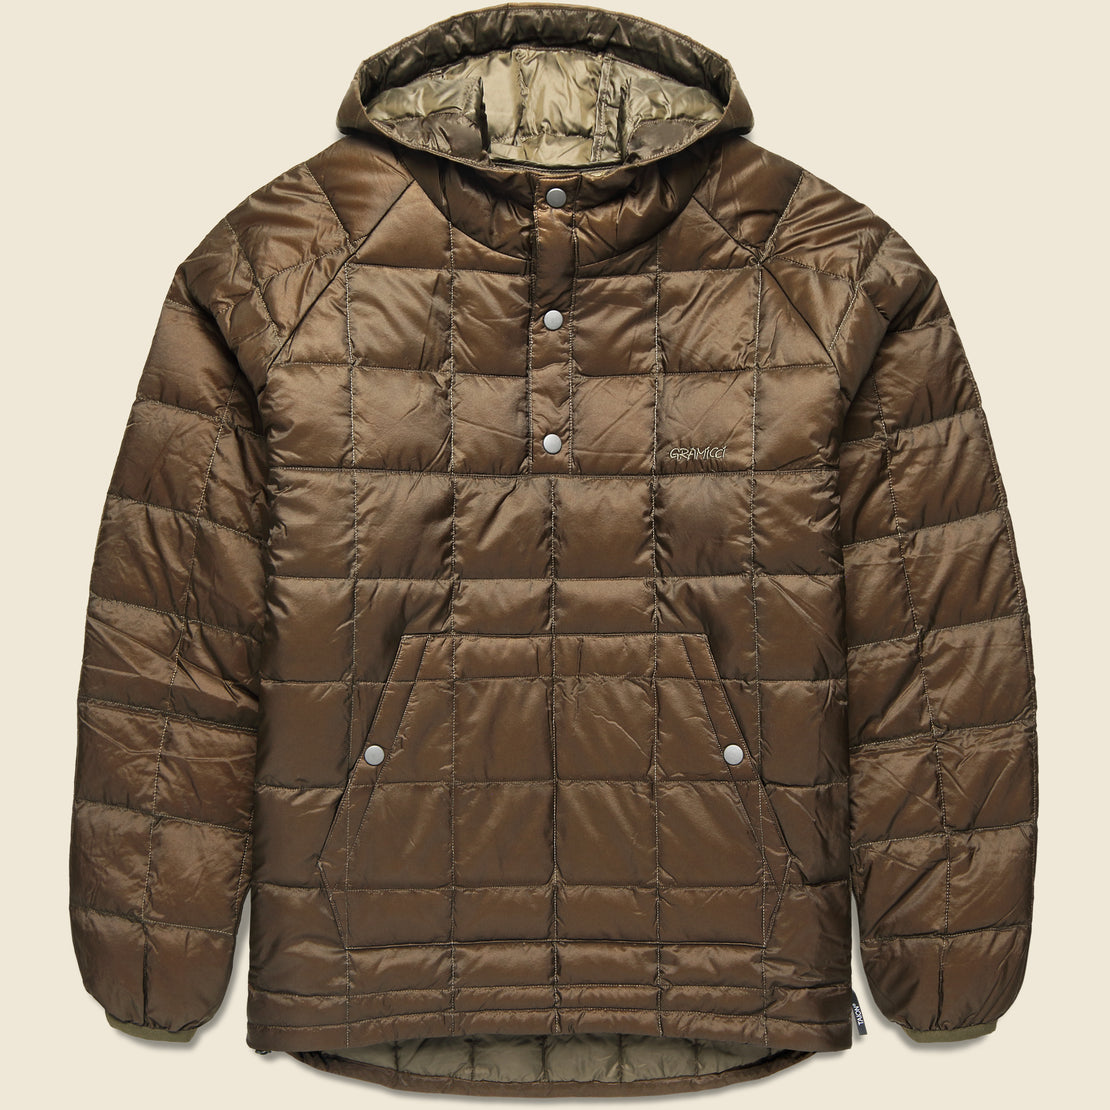 Gramicci Down Pullover Jacket - Deep Olive